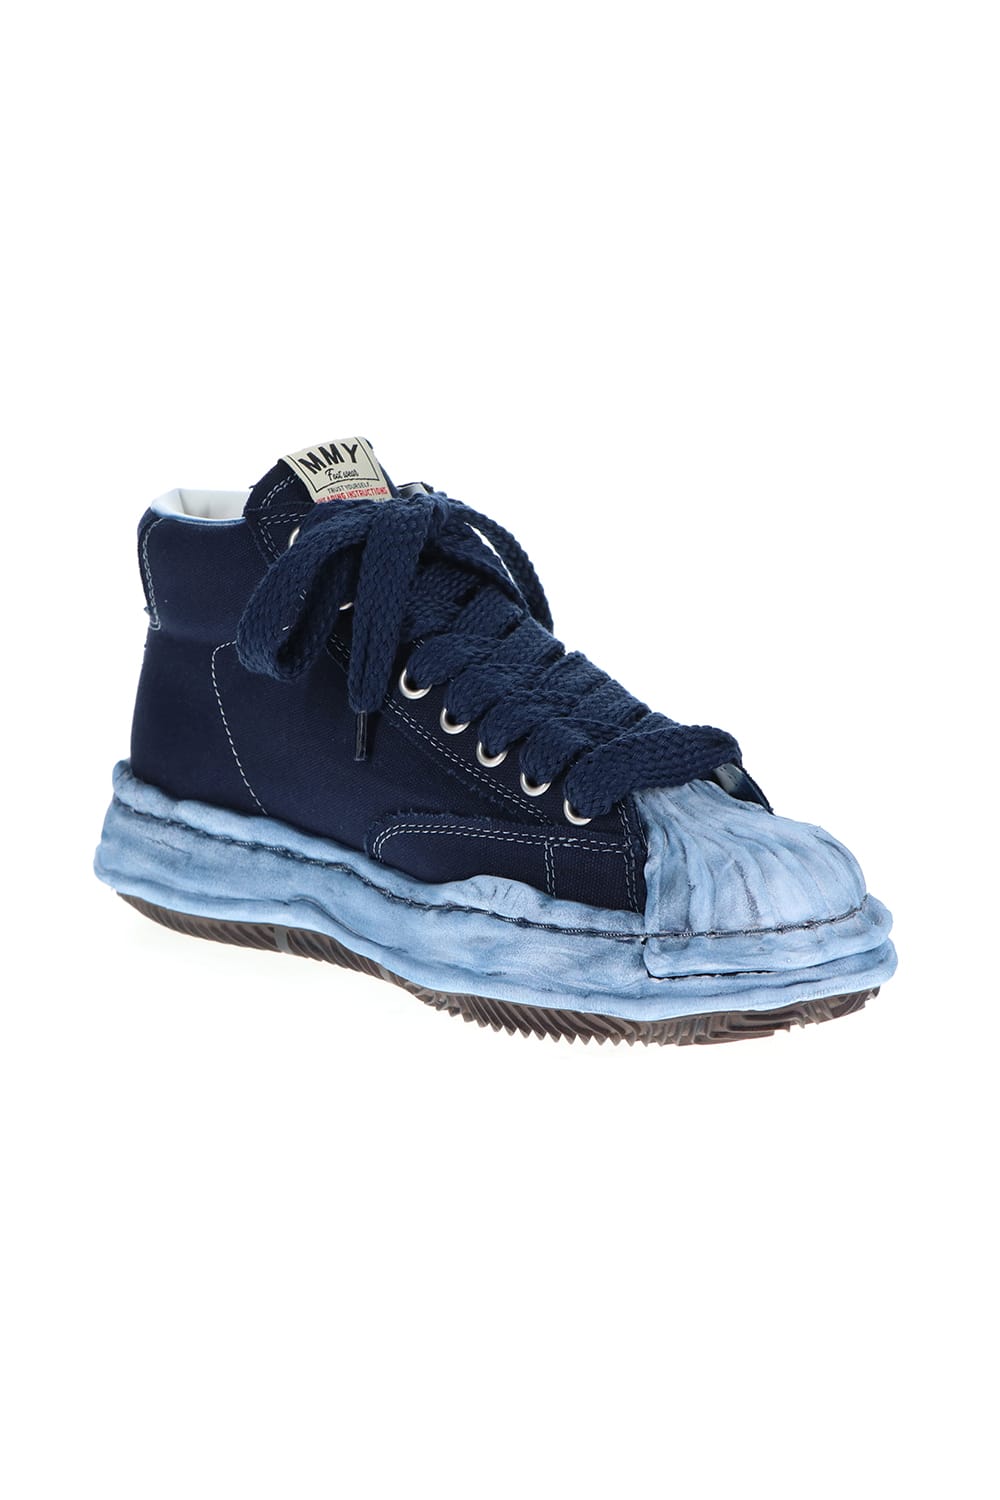 -BLAKEY High- Original STC sole over dyed canvas High-Top sneakers Navy